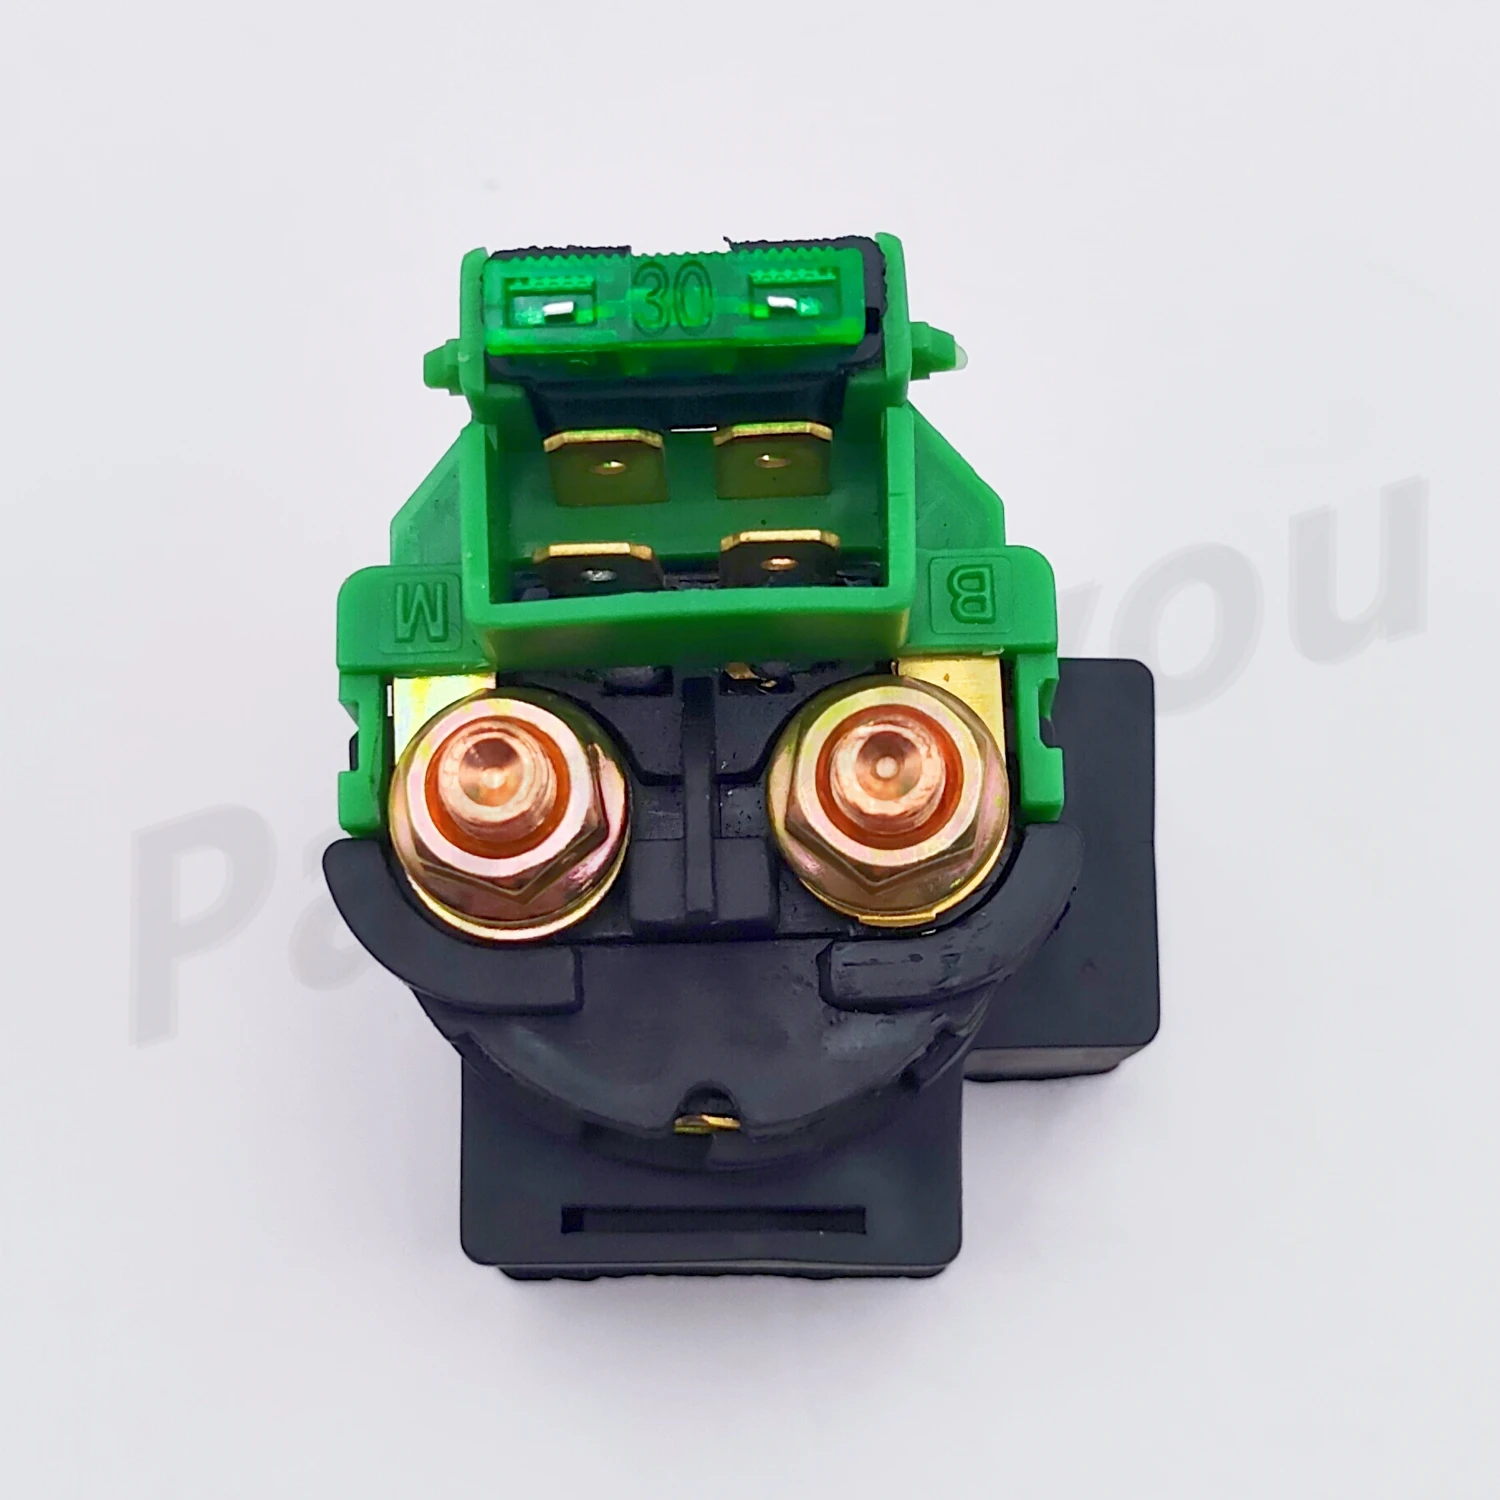 Solenoid Starter Relay for CFmoto 450 500 520 550 600 800 850 1000 X5 X6 X8 Z6 650TR 650MT 9010-150310 901-15.03.10 31800-5000 solenoid starter relay for cfmoto 400 450 500 x5 600 625 x6 z6 atv utv motorcycle 650 700 9010 150310 9cr6 150310 1000 gladiator